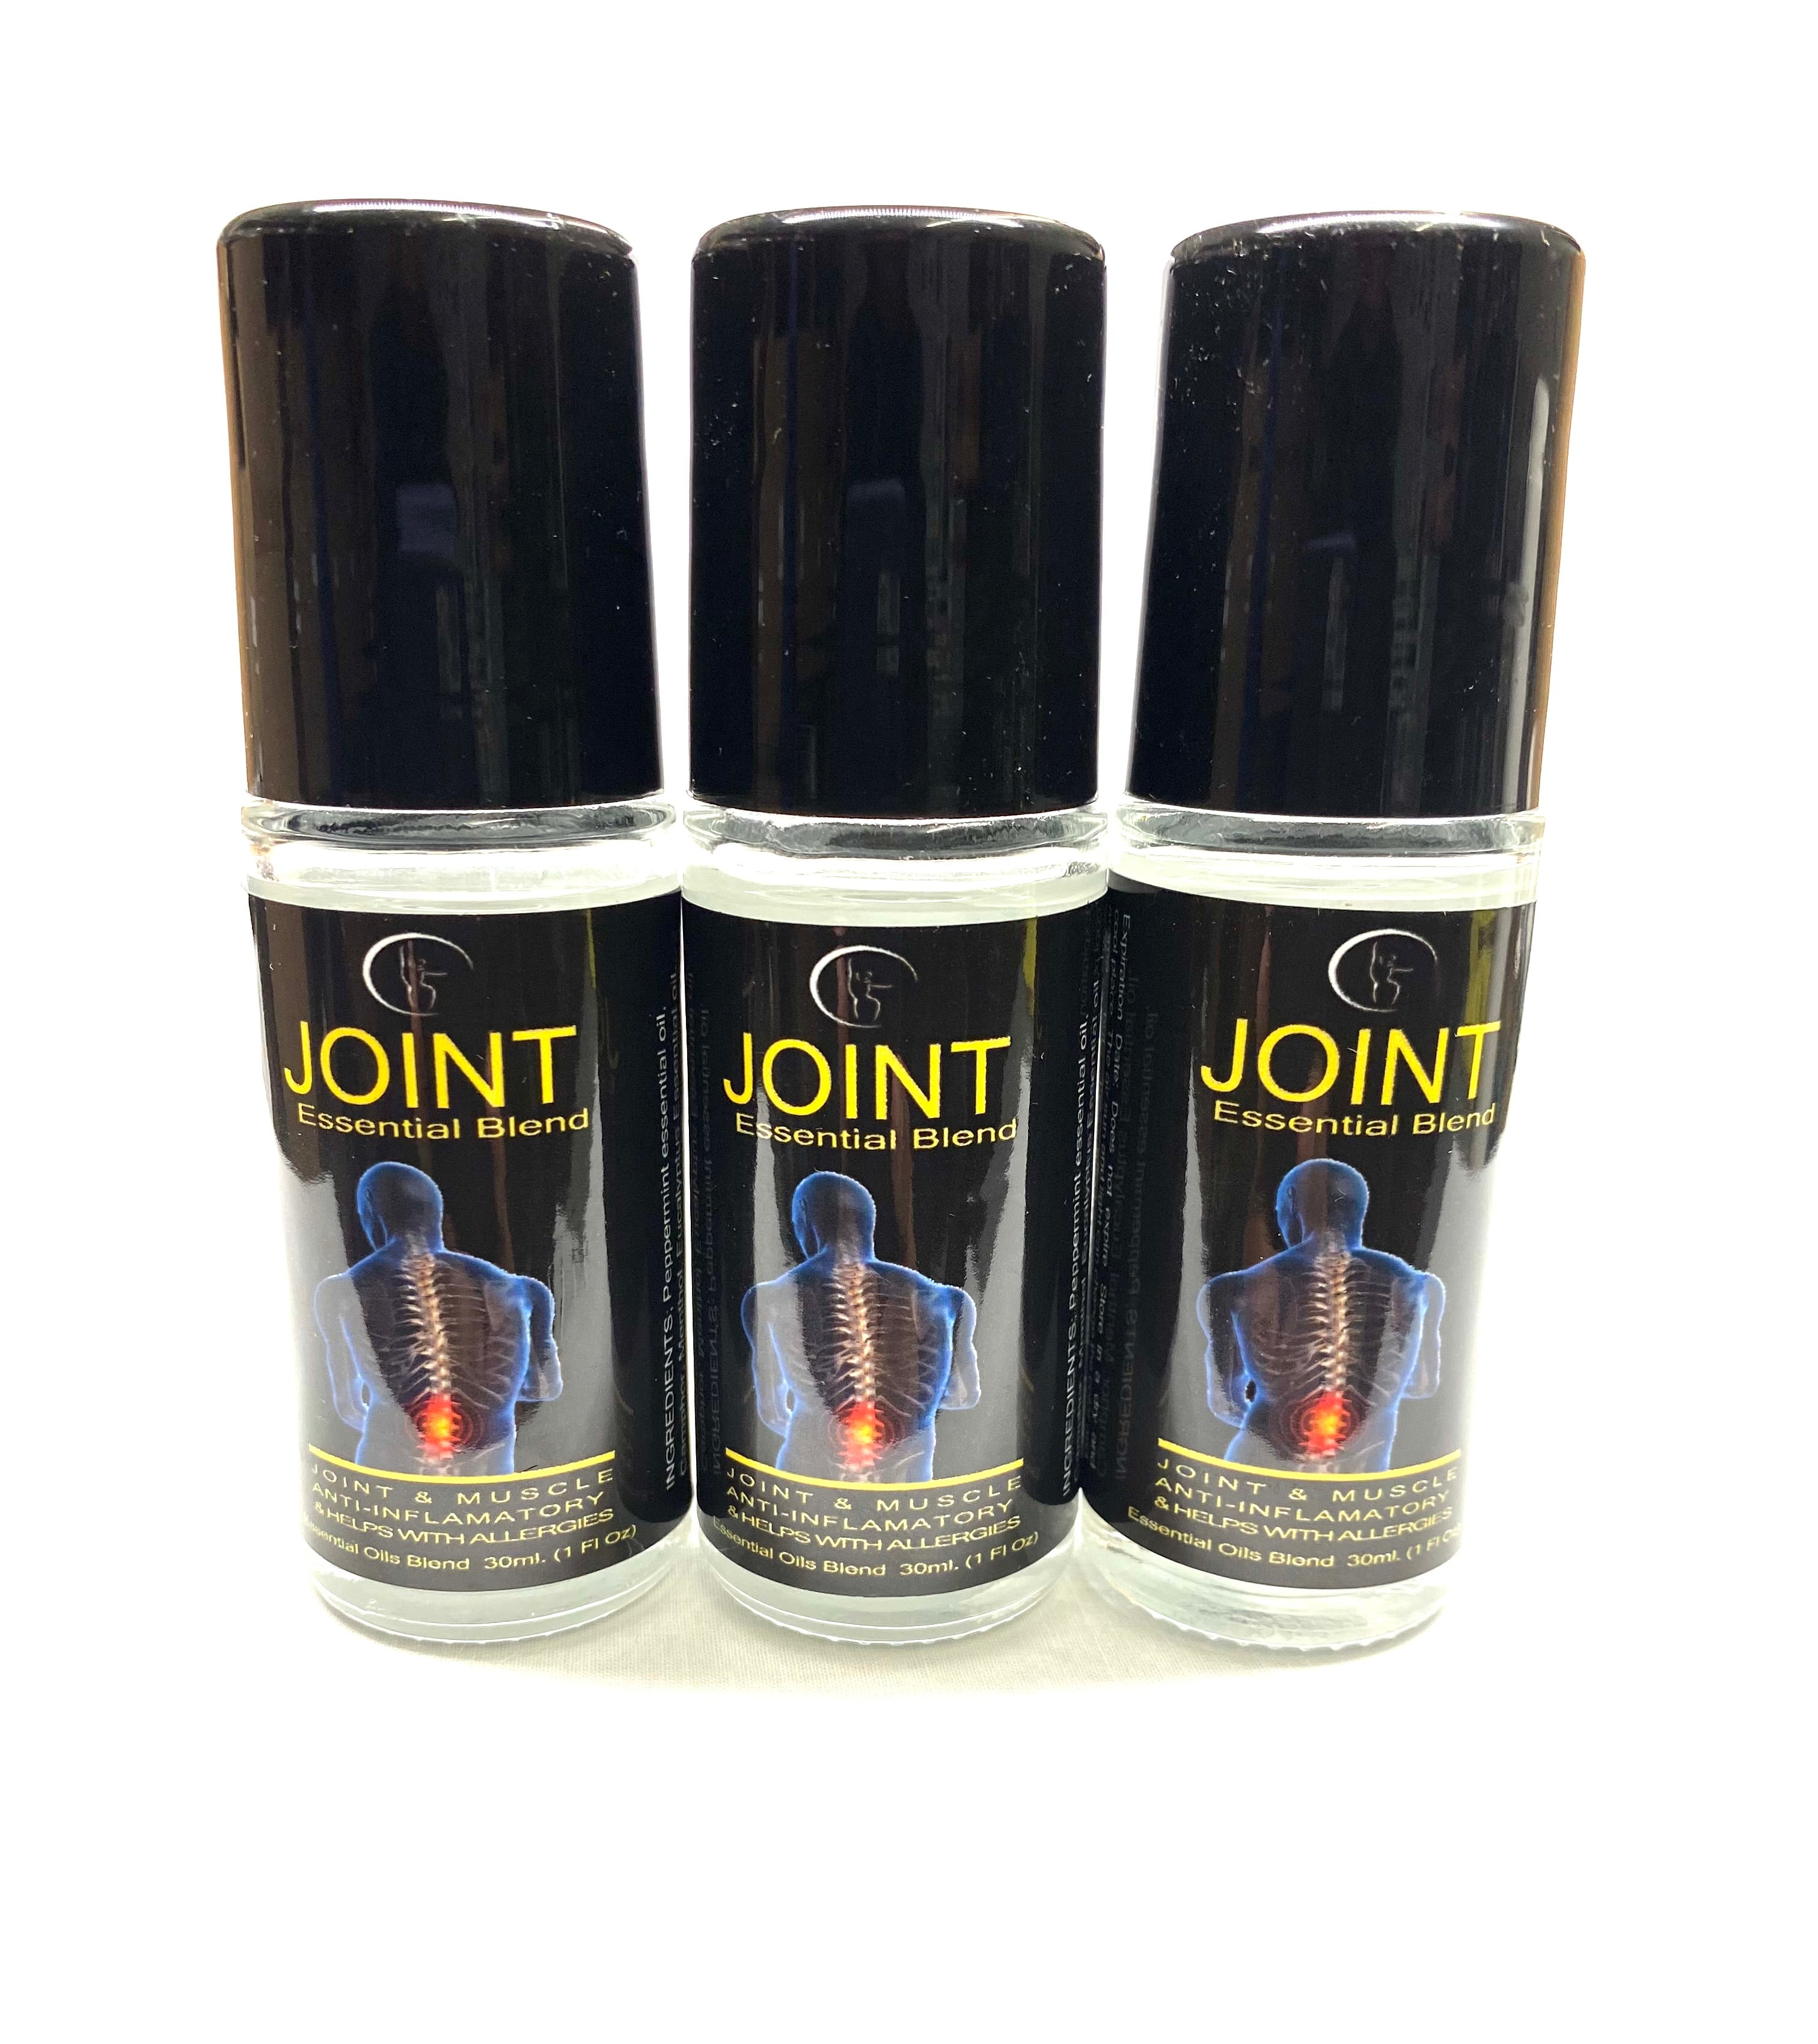 Bundles  Special JOINT Essential Blend new arrival !